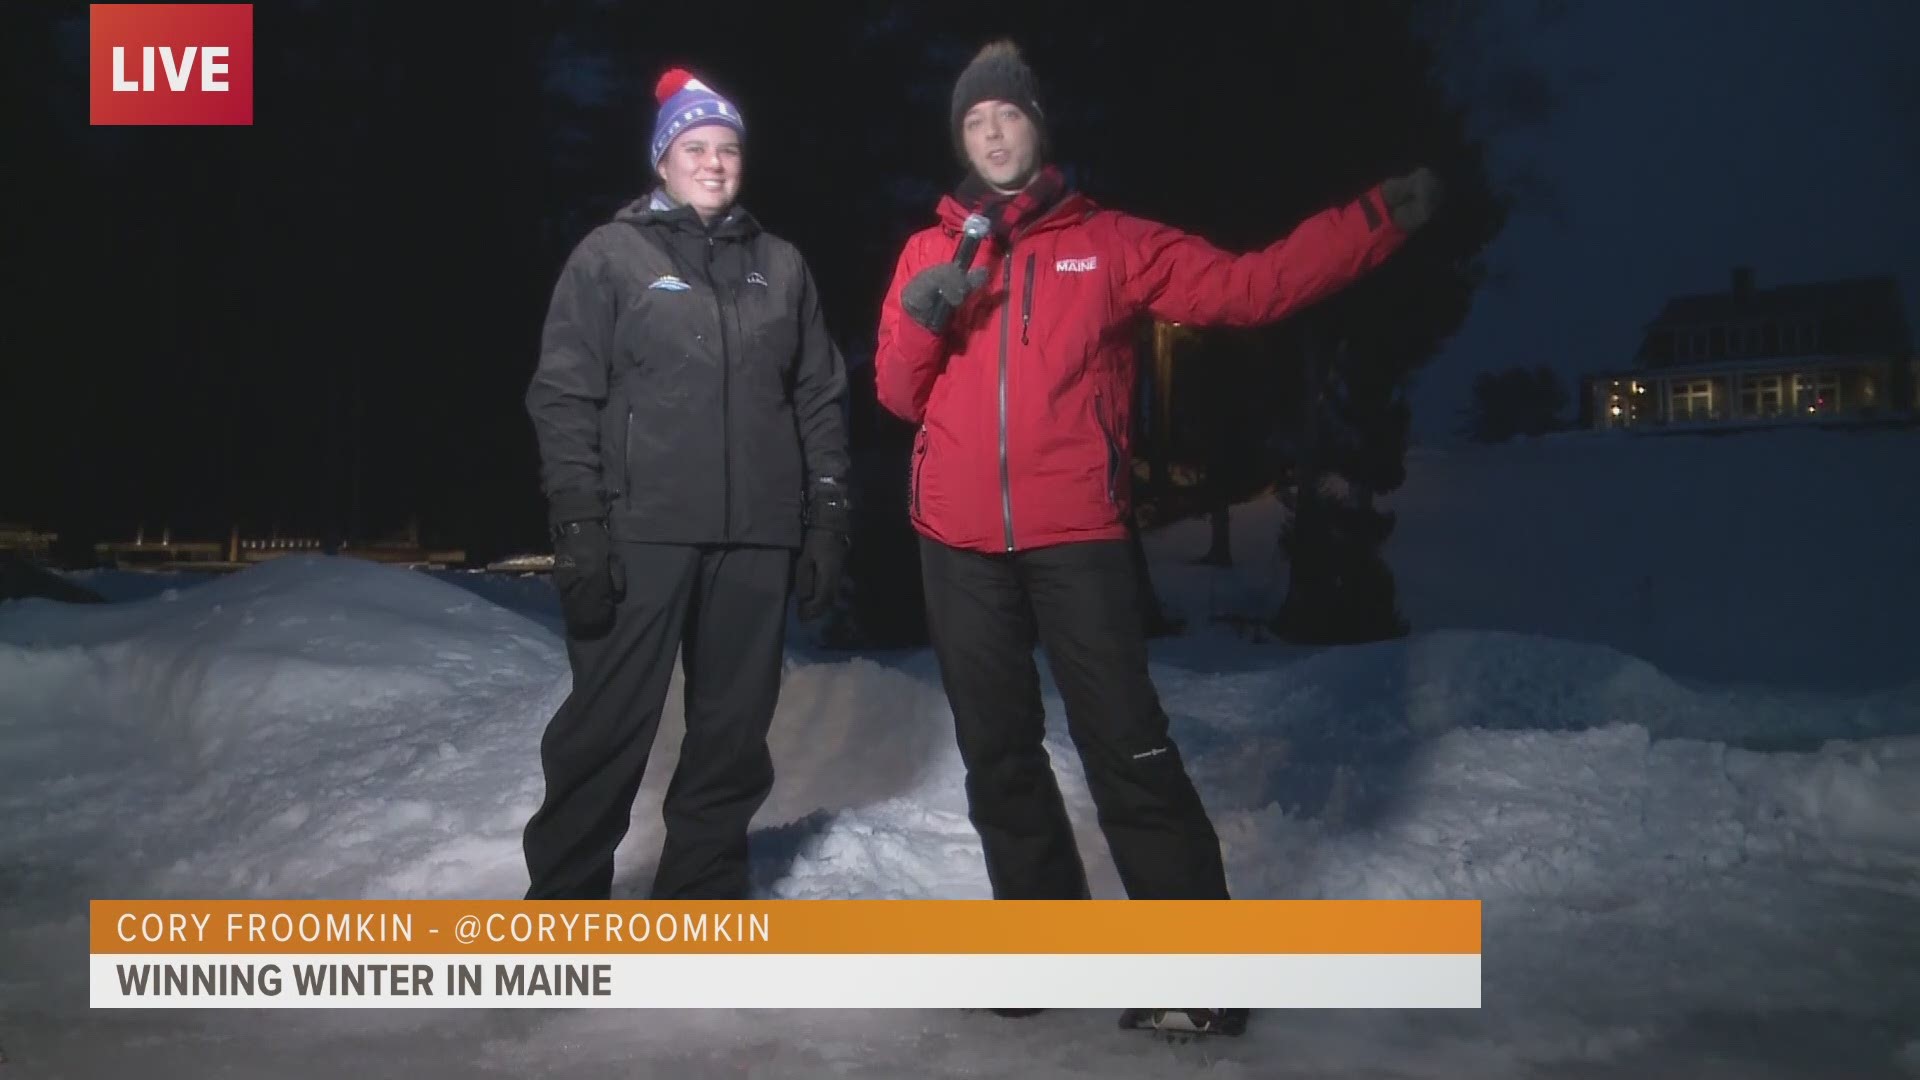 Cory Froomkin joins L.L.Bean Discovery School official talking about how snowshoes can help you win winter.